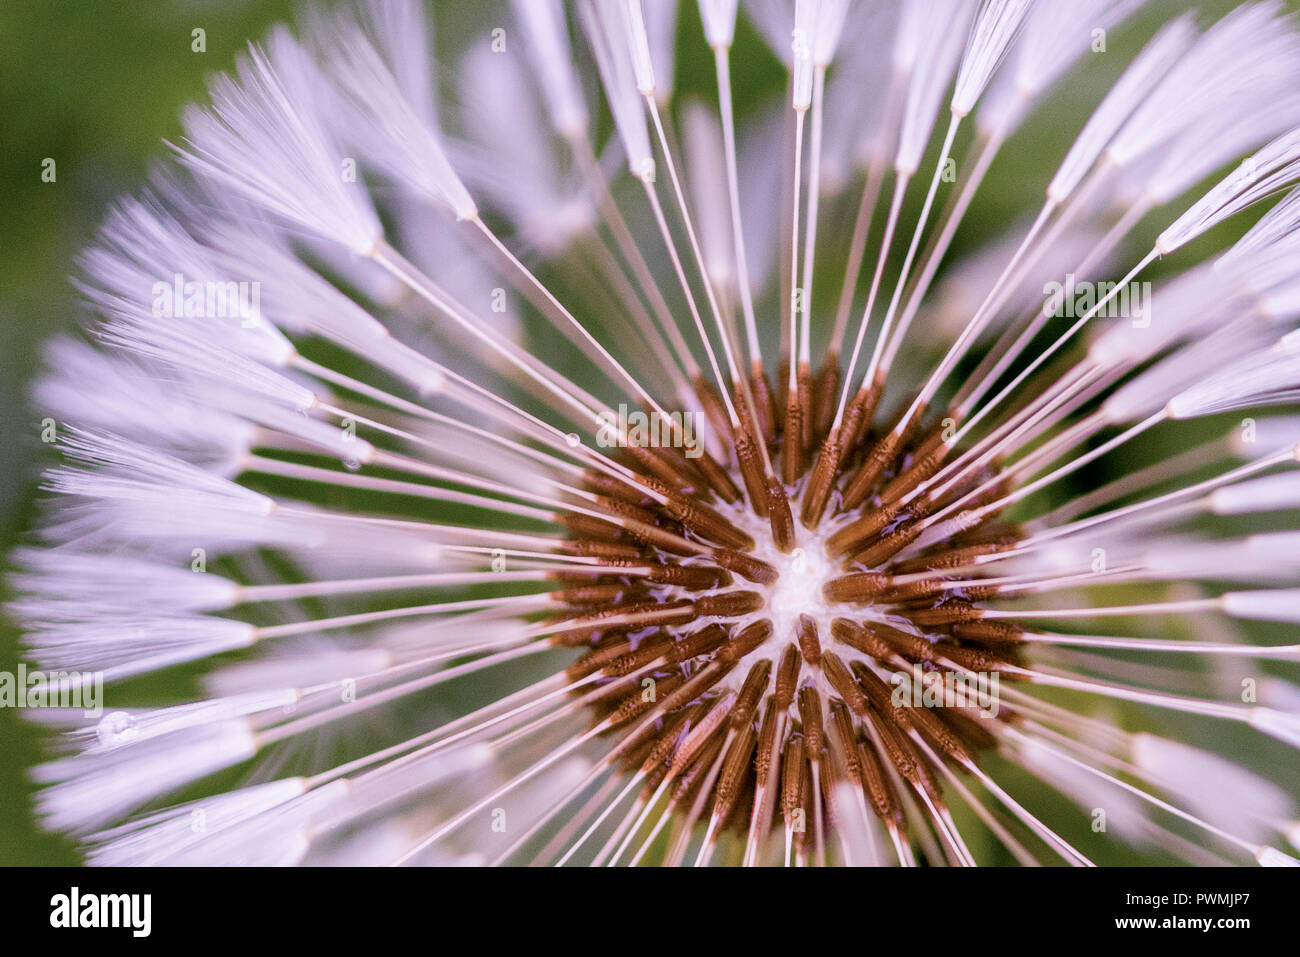 Close up of Dandelion Seed Puffs with a blurred background Stock Photo